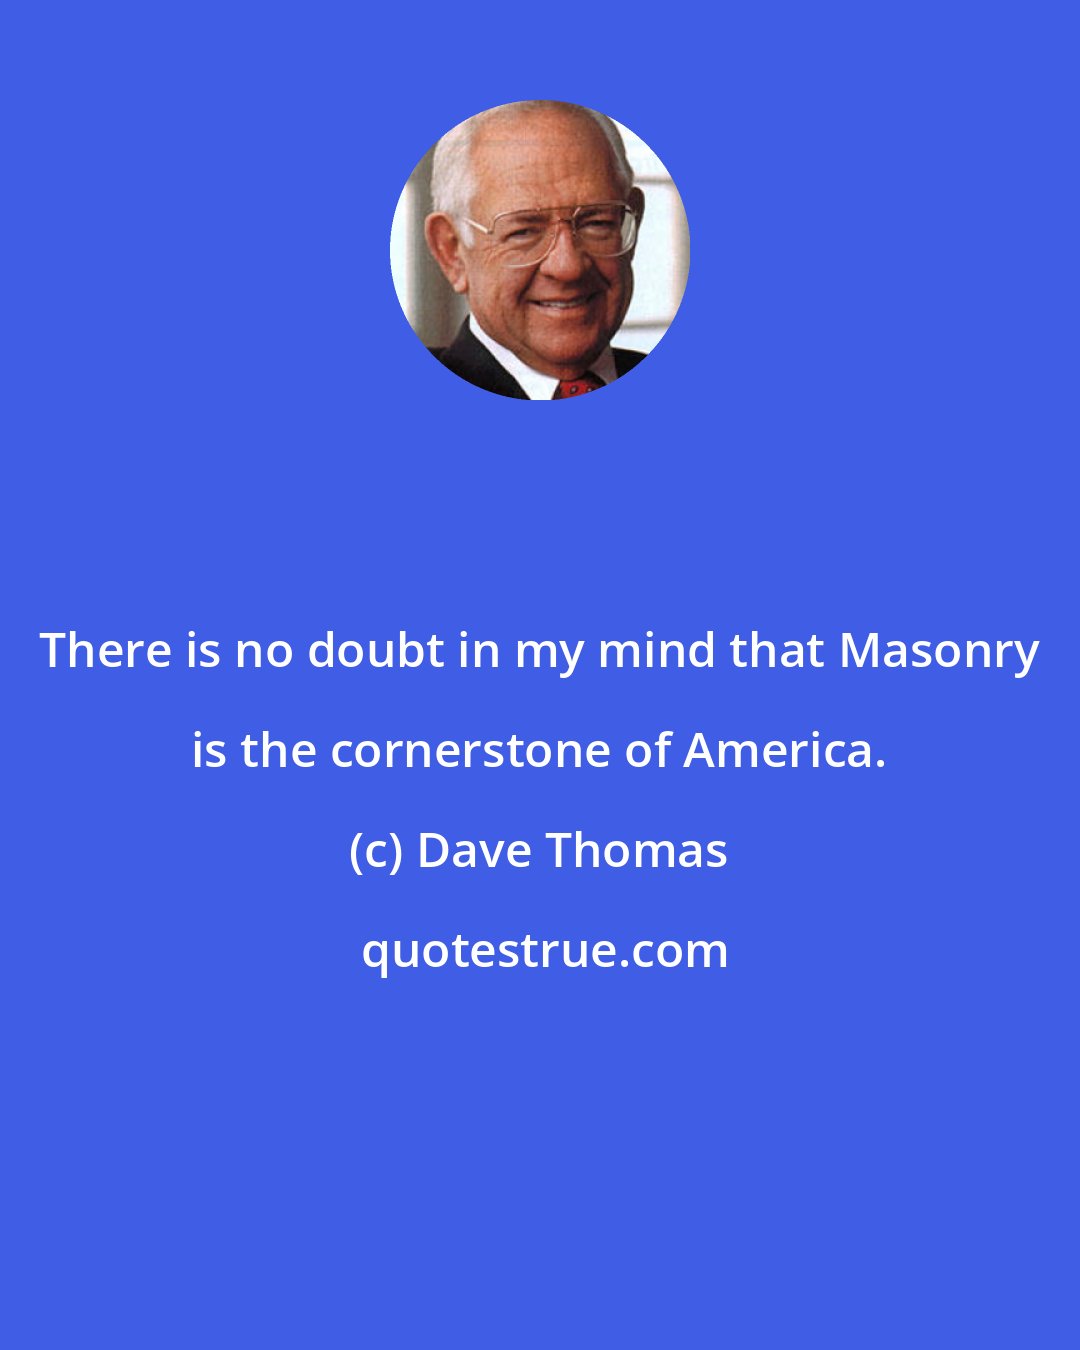 Dave Thomas: There is no doubt in my mind that Masonry is the cornerstone of America.